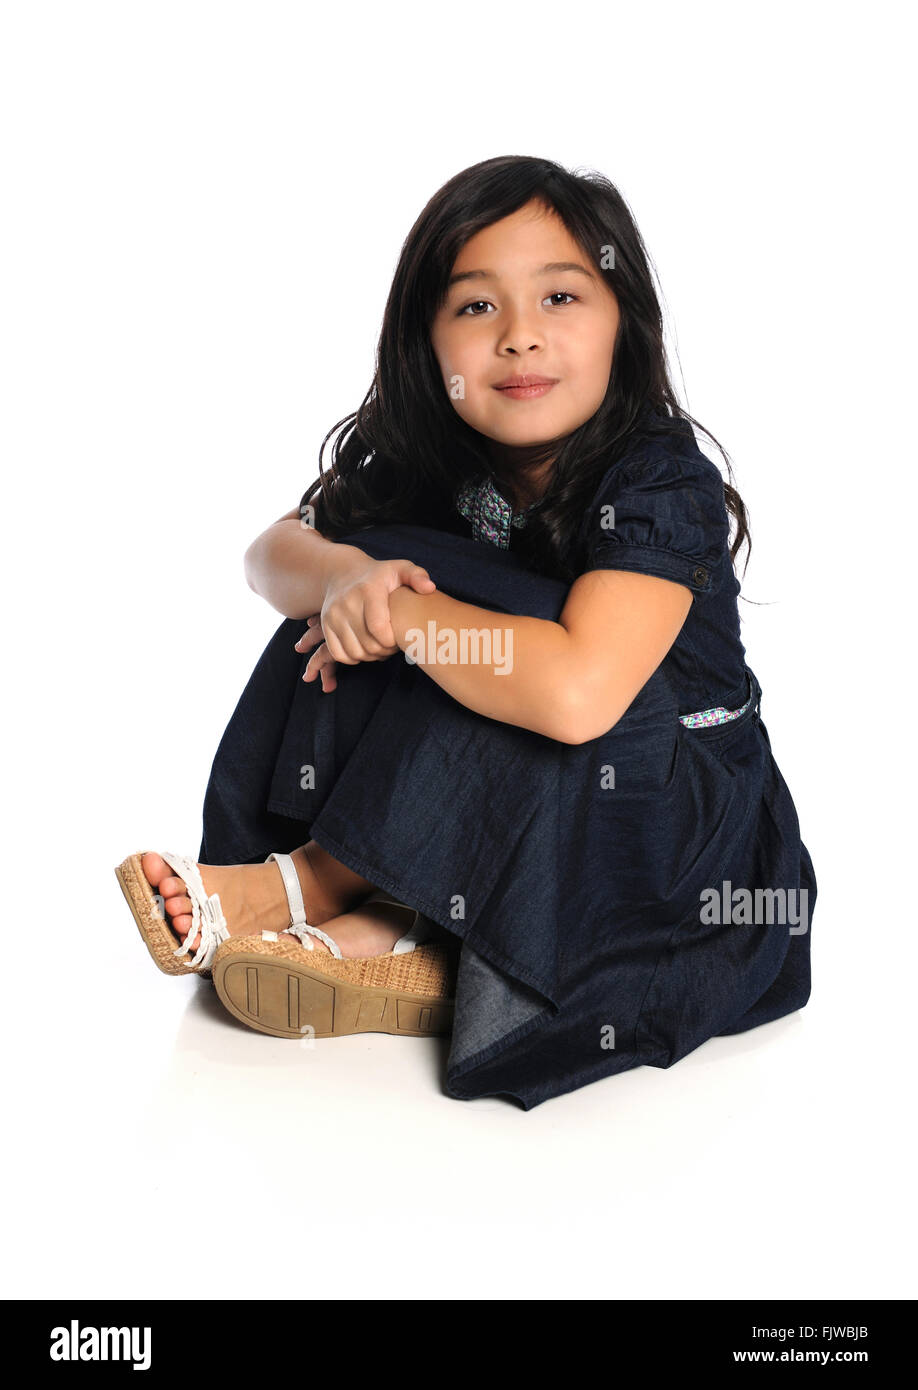 Portrait of cute Asian girl sitting isolated over white background Stock Photo